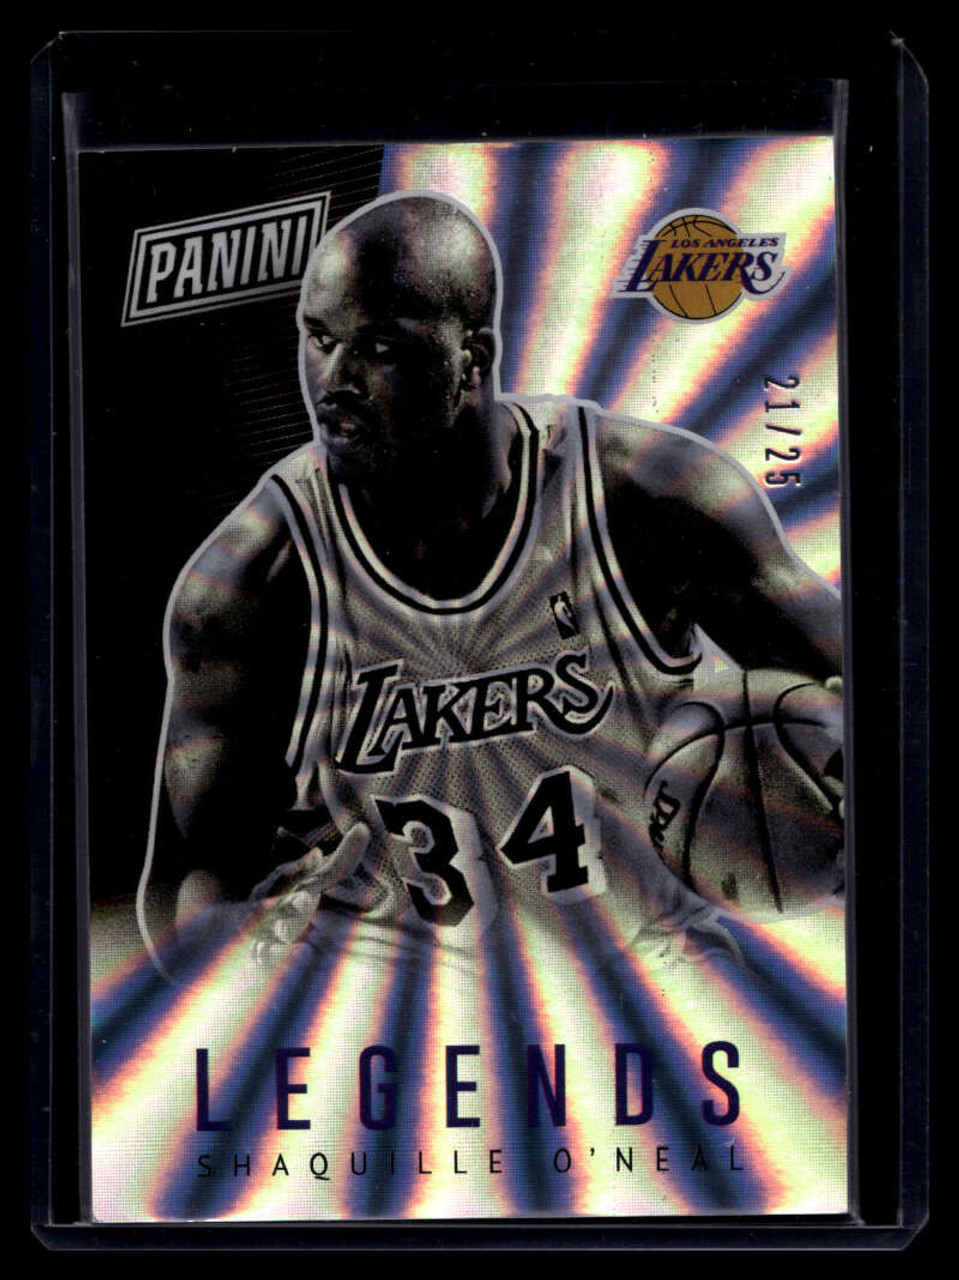 2017 Panini National Convention Rainbow Spokes Thick Shaquille O